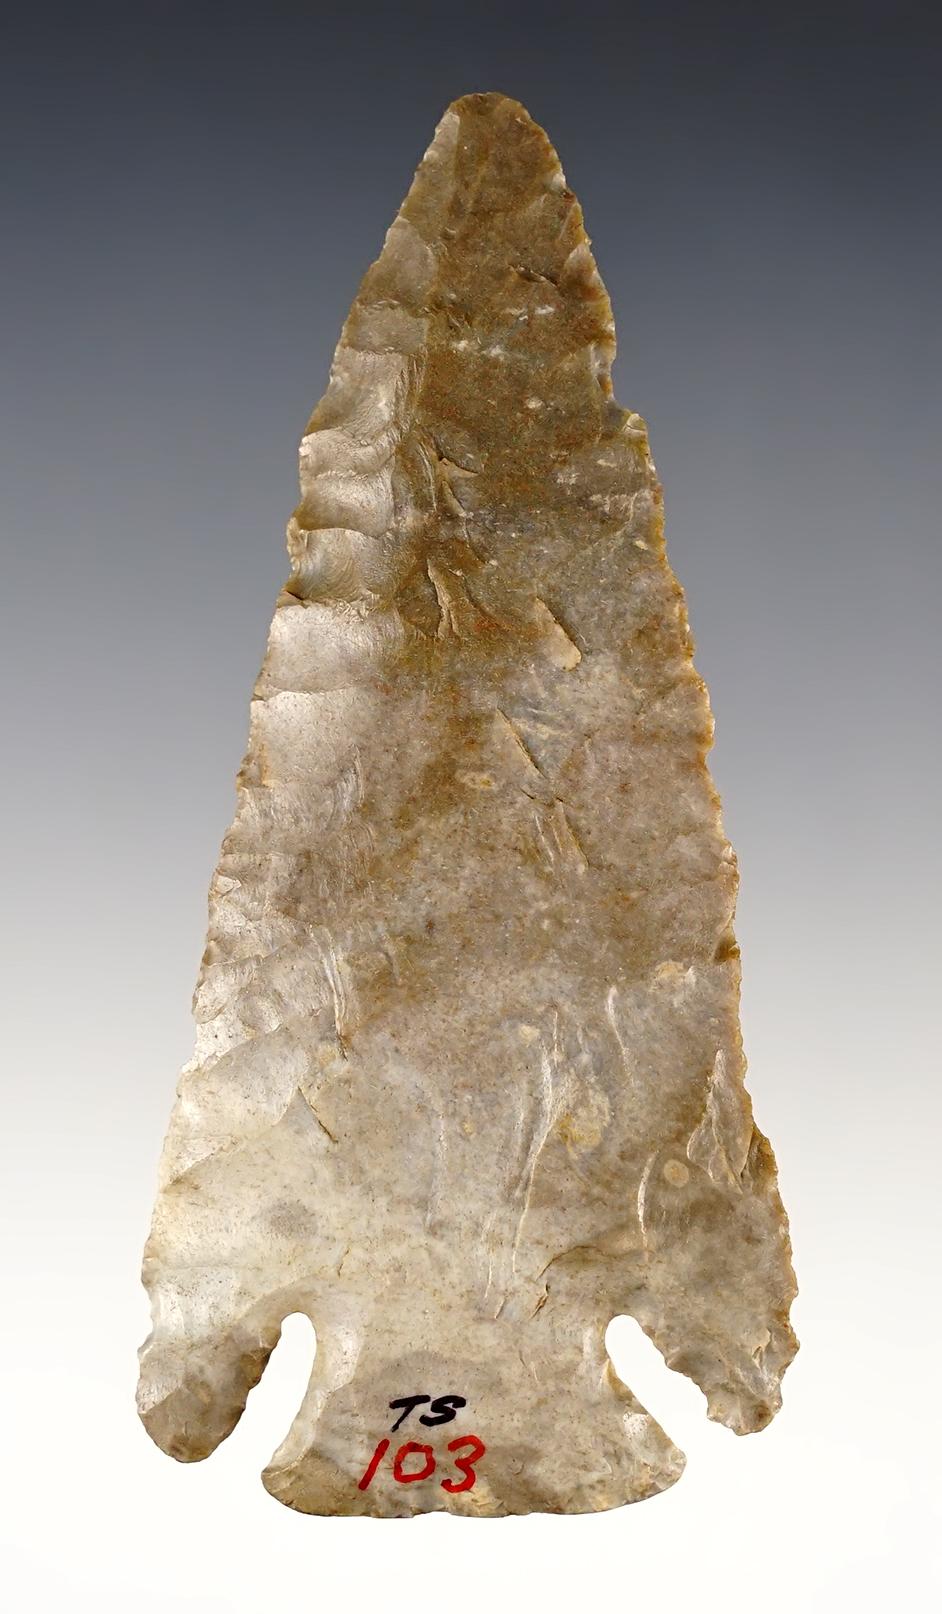 3 3/4" Lost Lake made from Ft. Payne Chert. Found in Central Kentucky. Dickey COA.